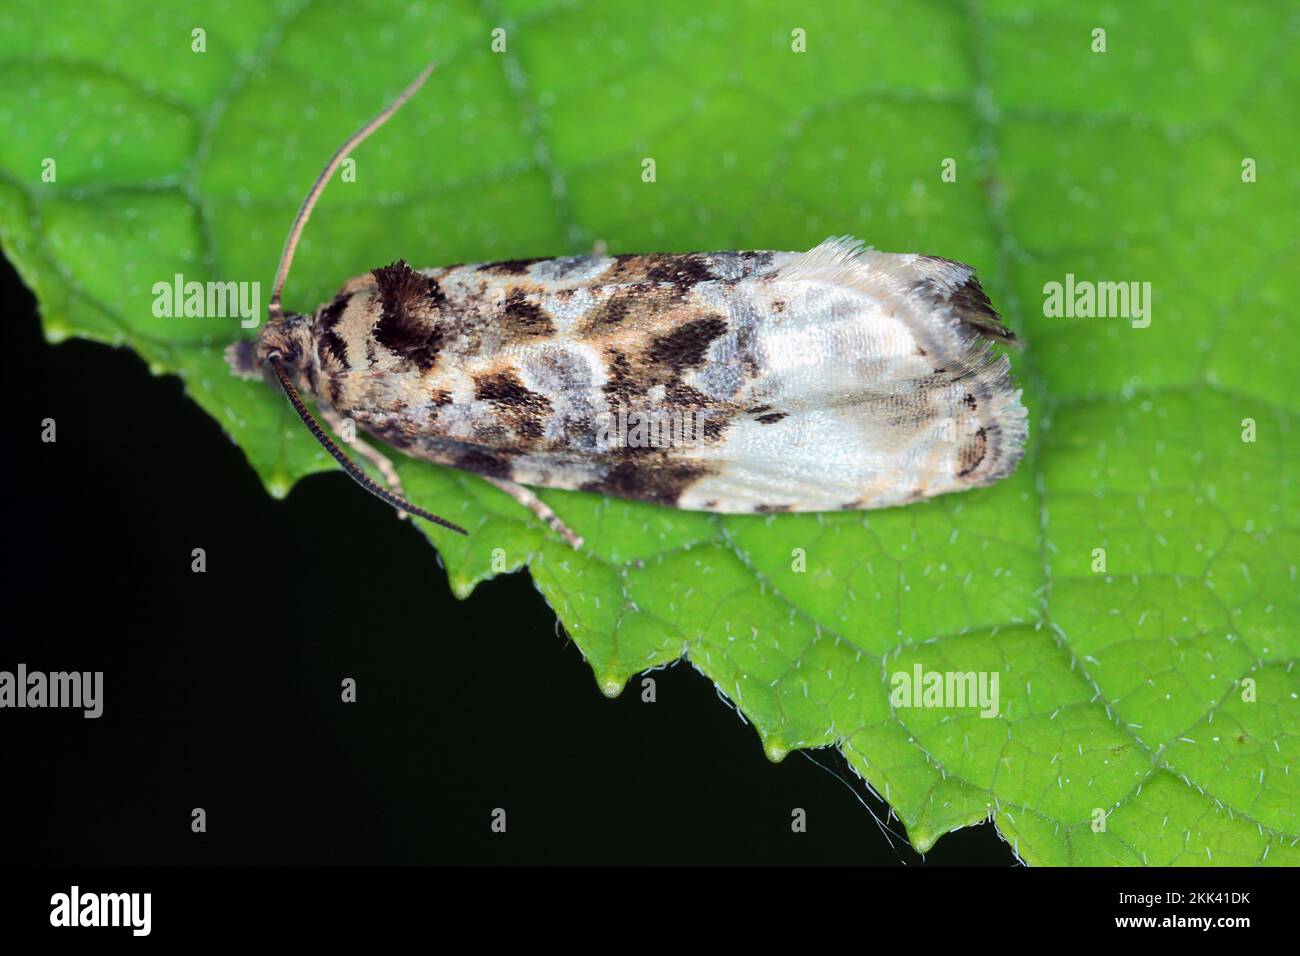 Adult Tortricid Leafroller Moth of the Family Tortricidae. Stock Photo